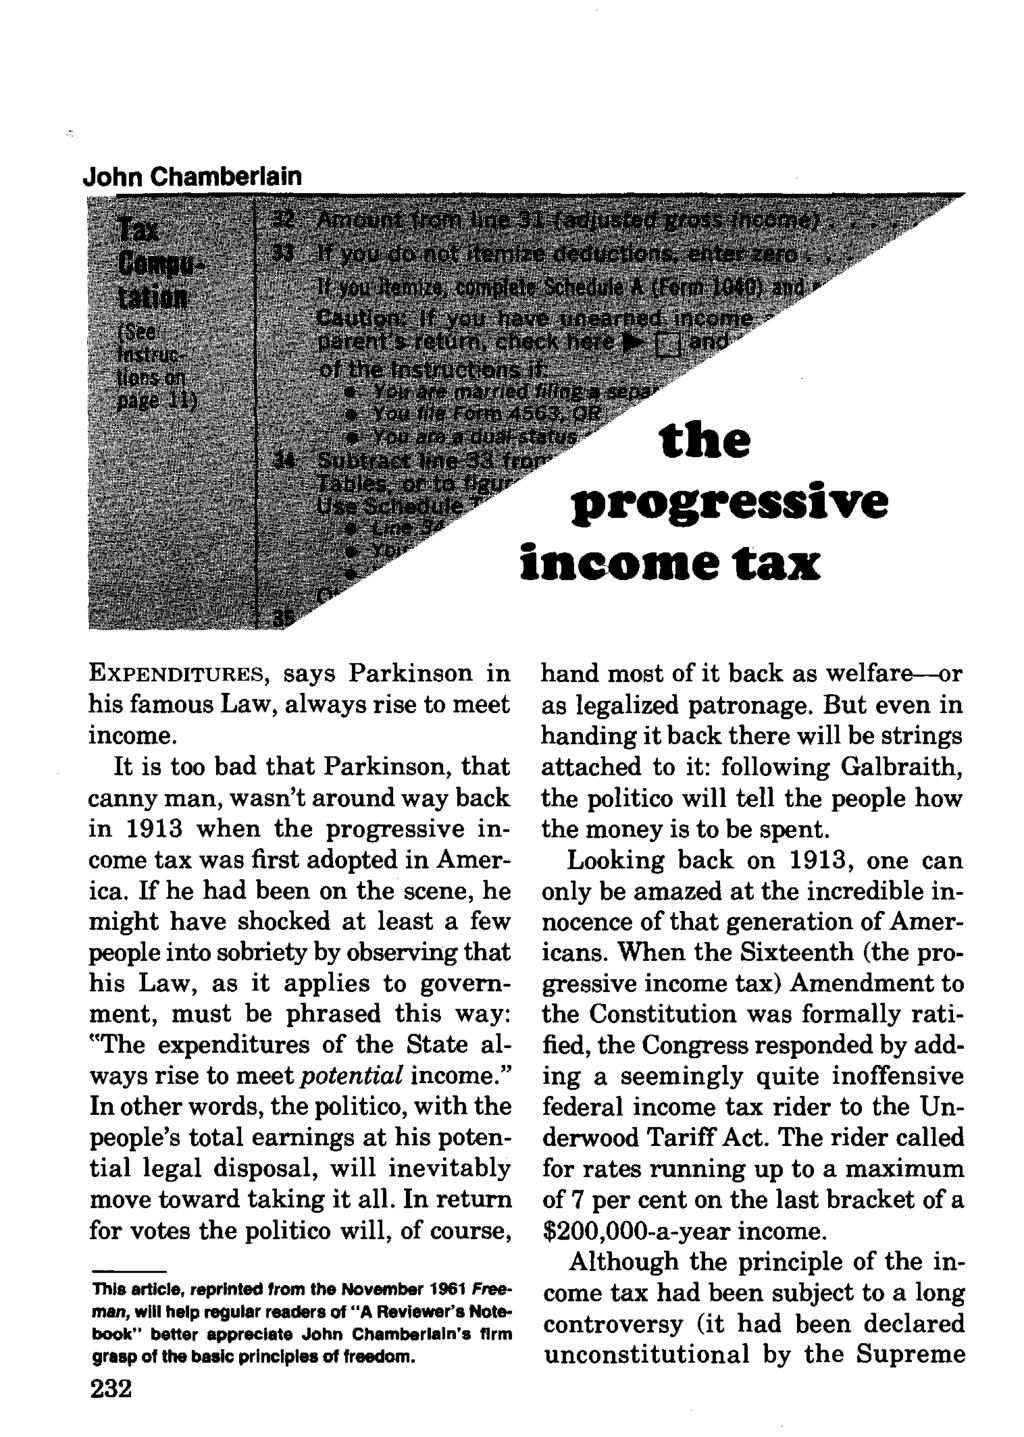 John Chamberlain the progressive income tax EXPENDITURES, says Parkinson in his famous Law, always rise to meet income.